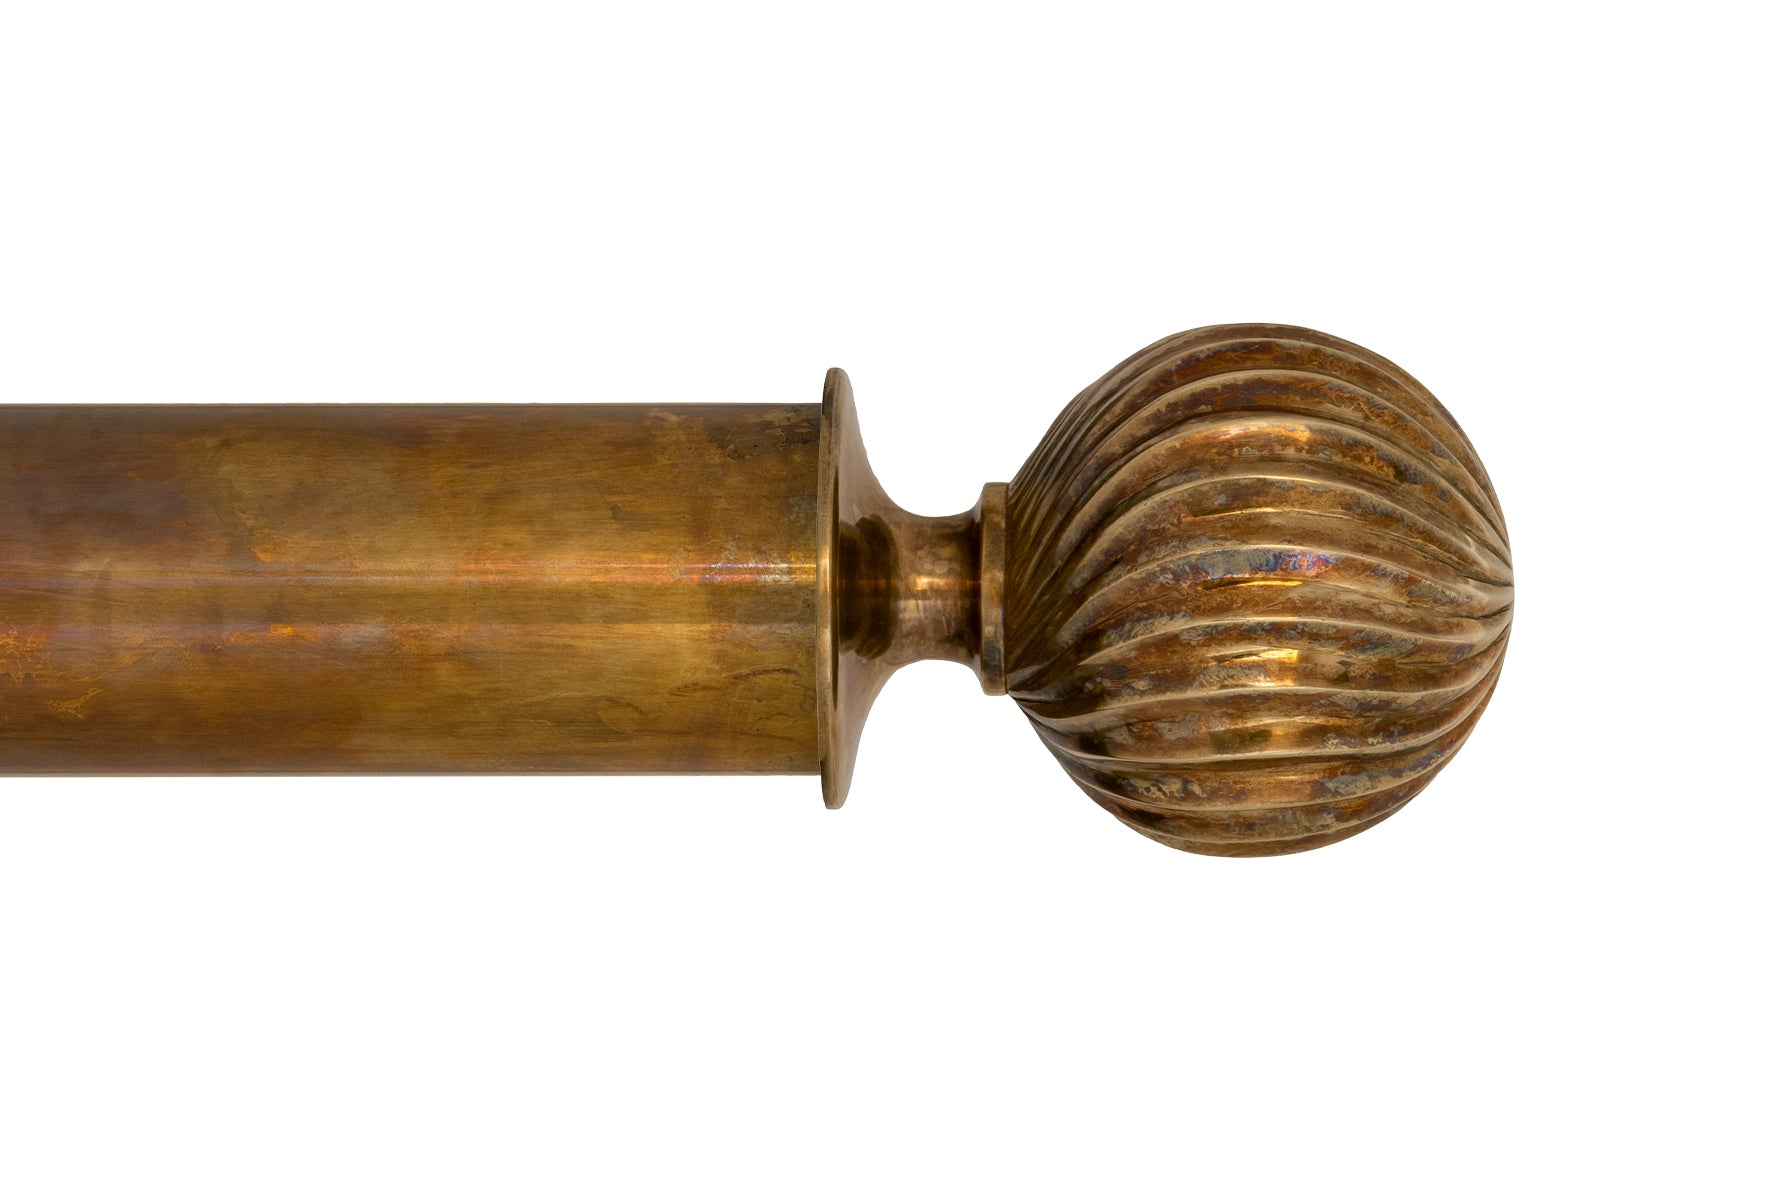 Tillys Classic Twisted Ball Finial Curtain Pole Set in Old Brass